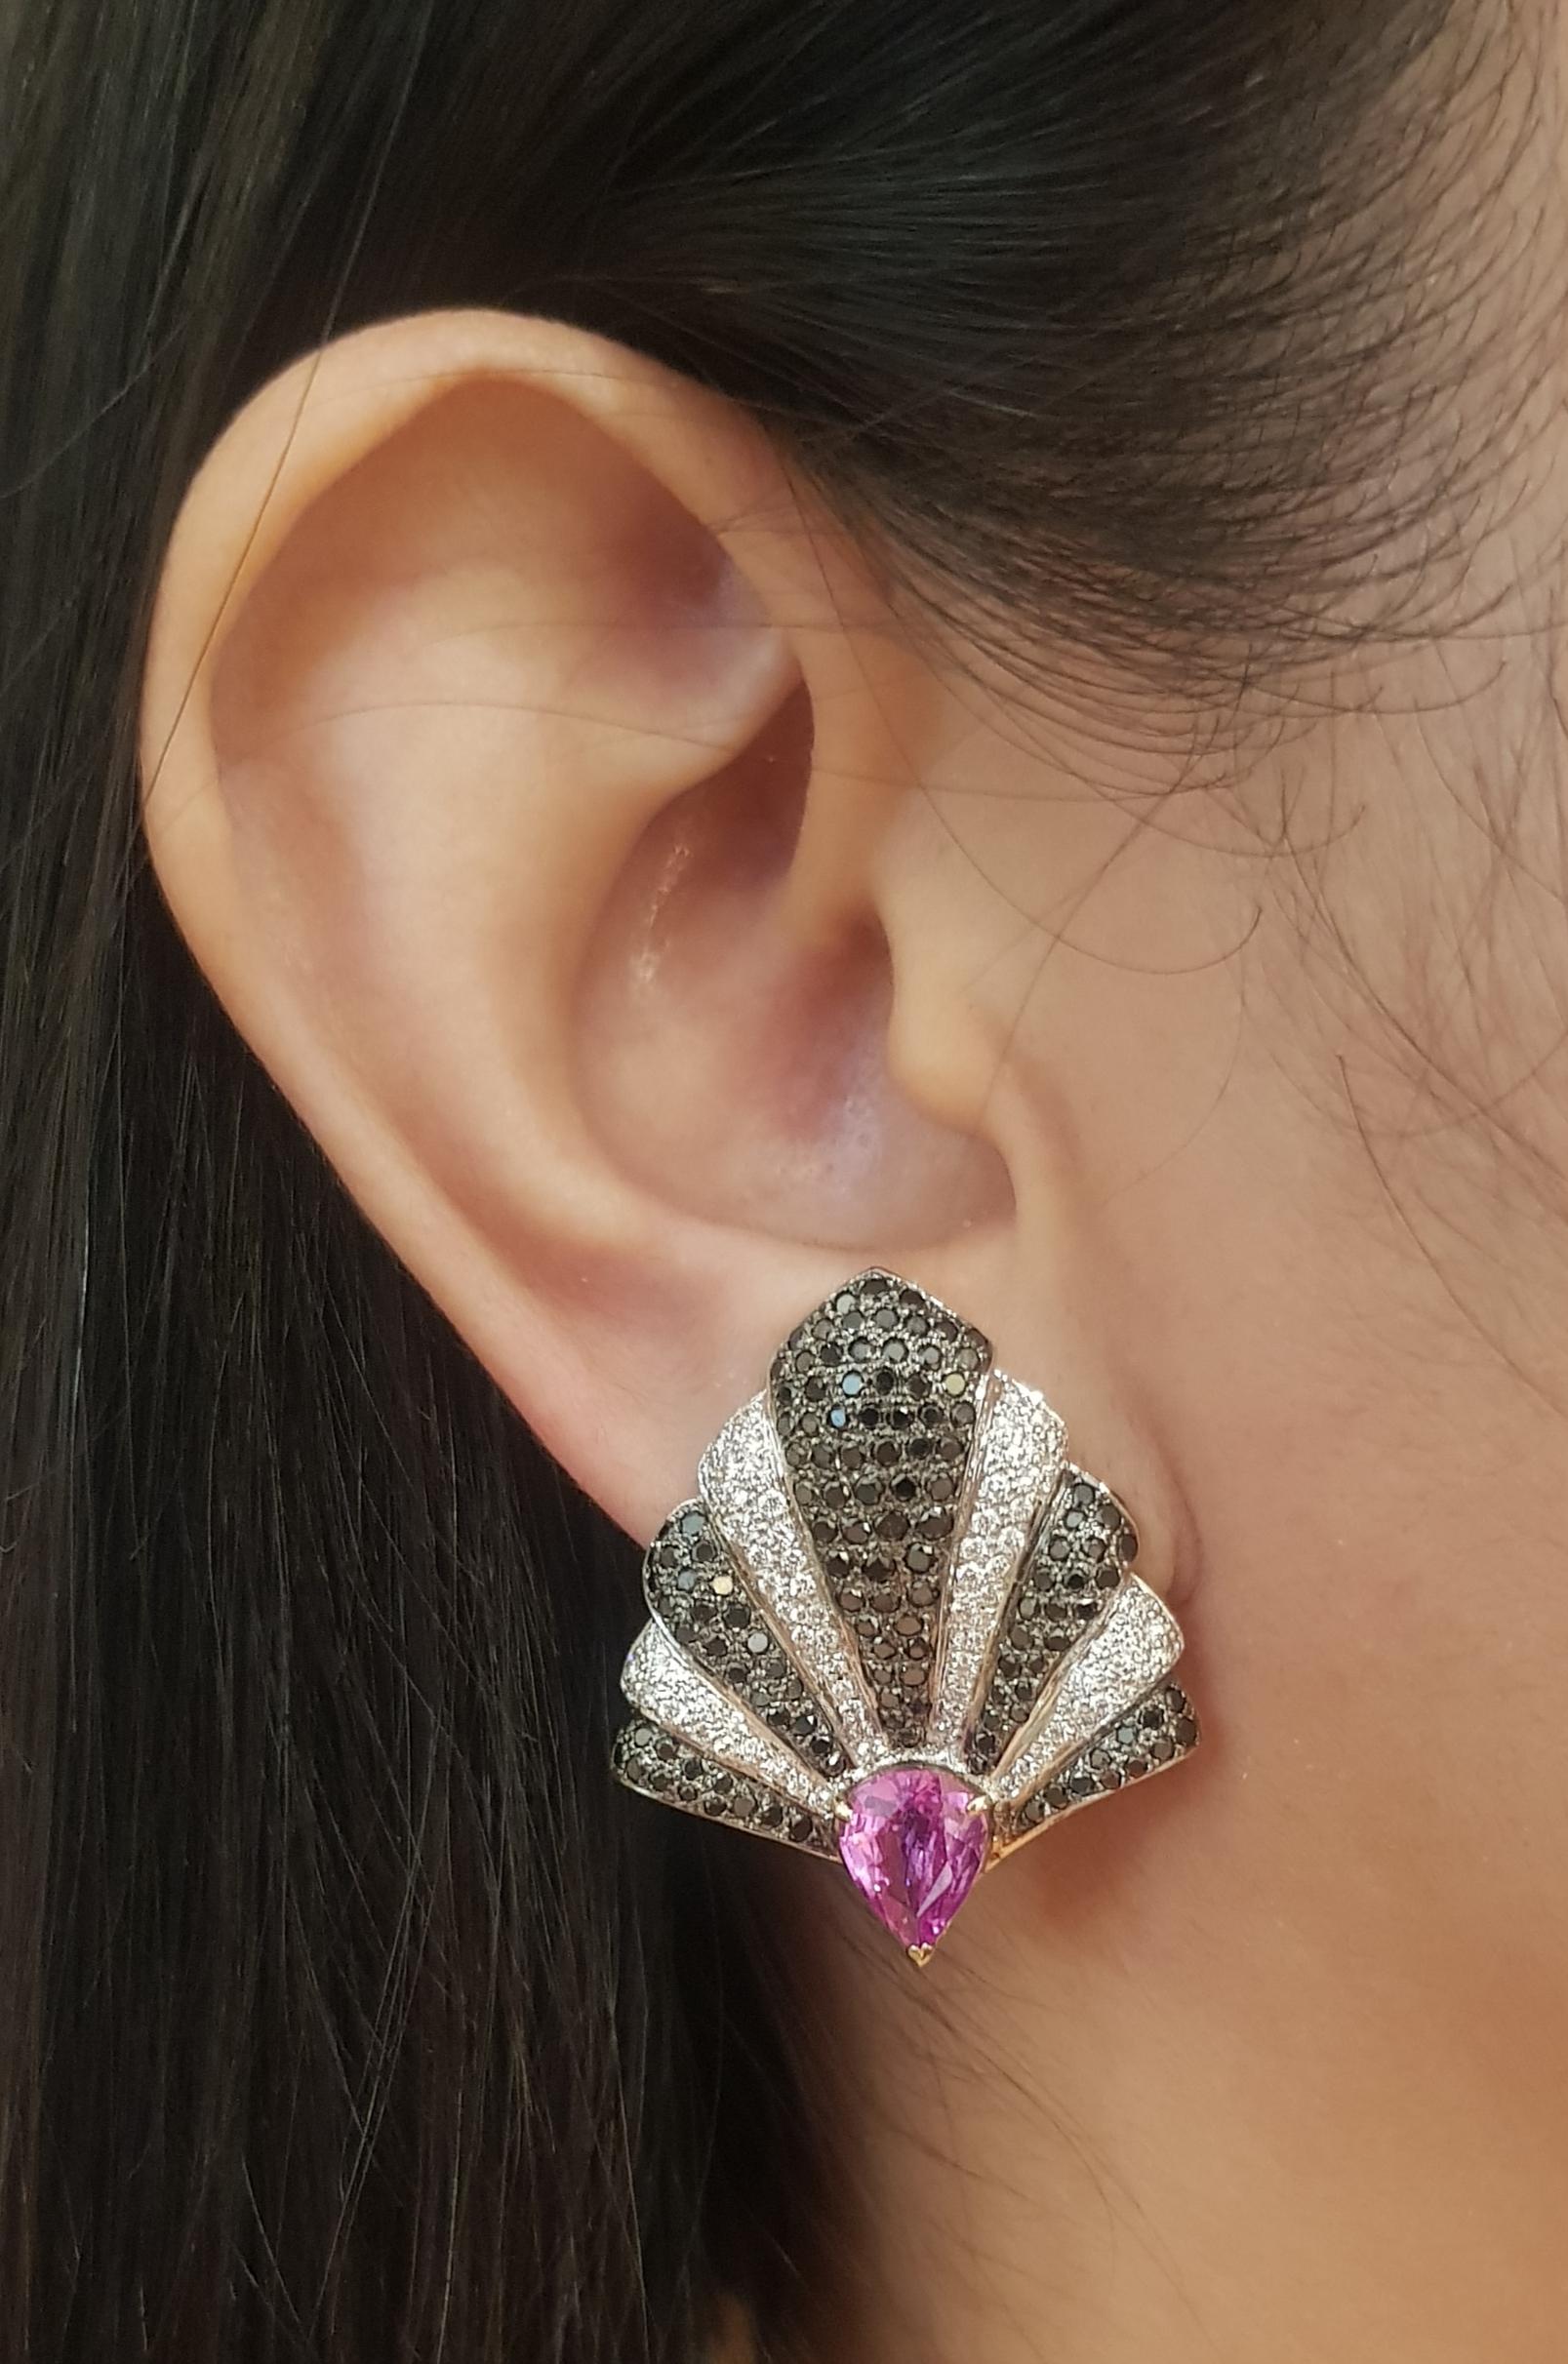 Pink Sapphire 3.14 carats, Diamond 0.94 carat and Black Diamond 2.32 carats Earrings set in 18K Gold Settings

Width: 2.7 cm 
Length: 3.1 cm
Total Weight: 16.39 grams

